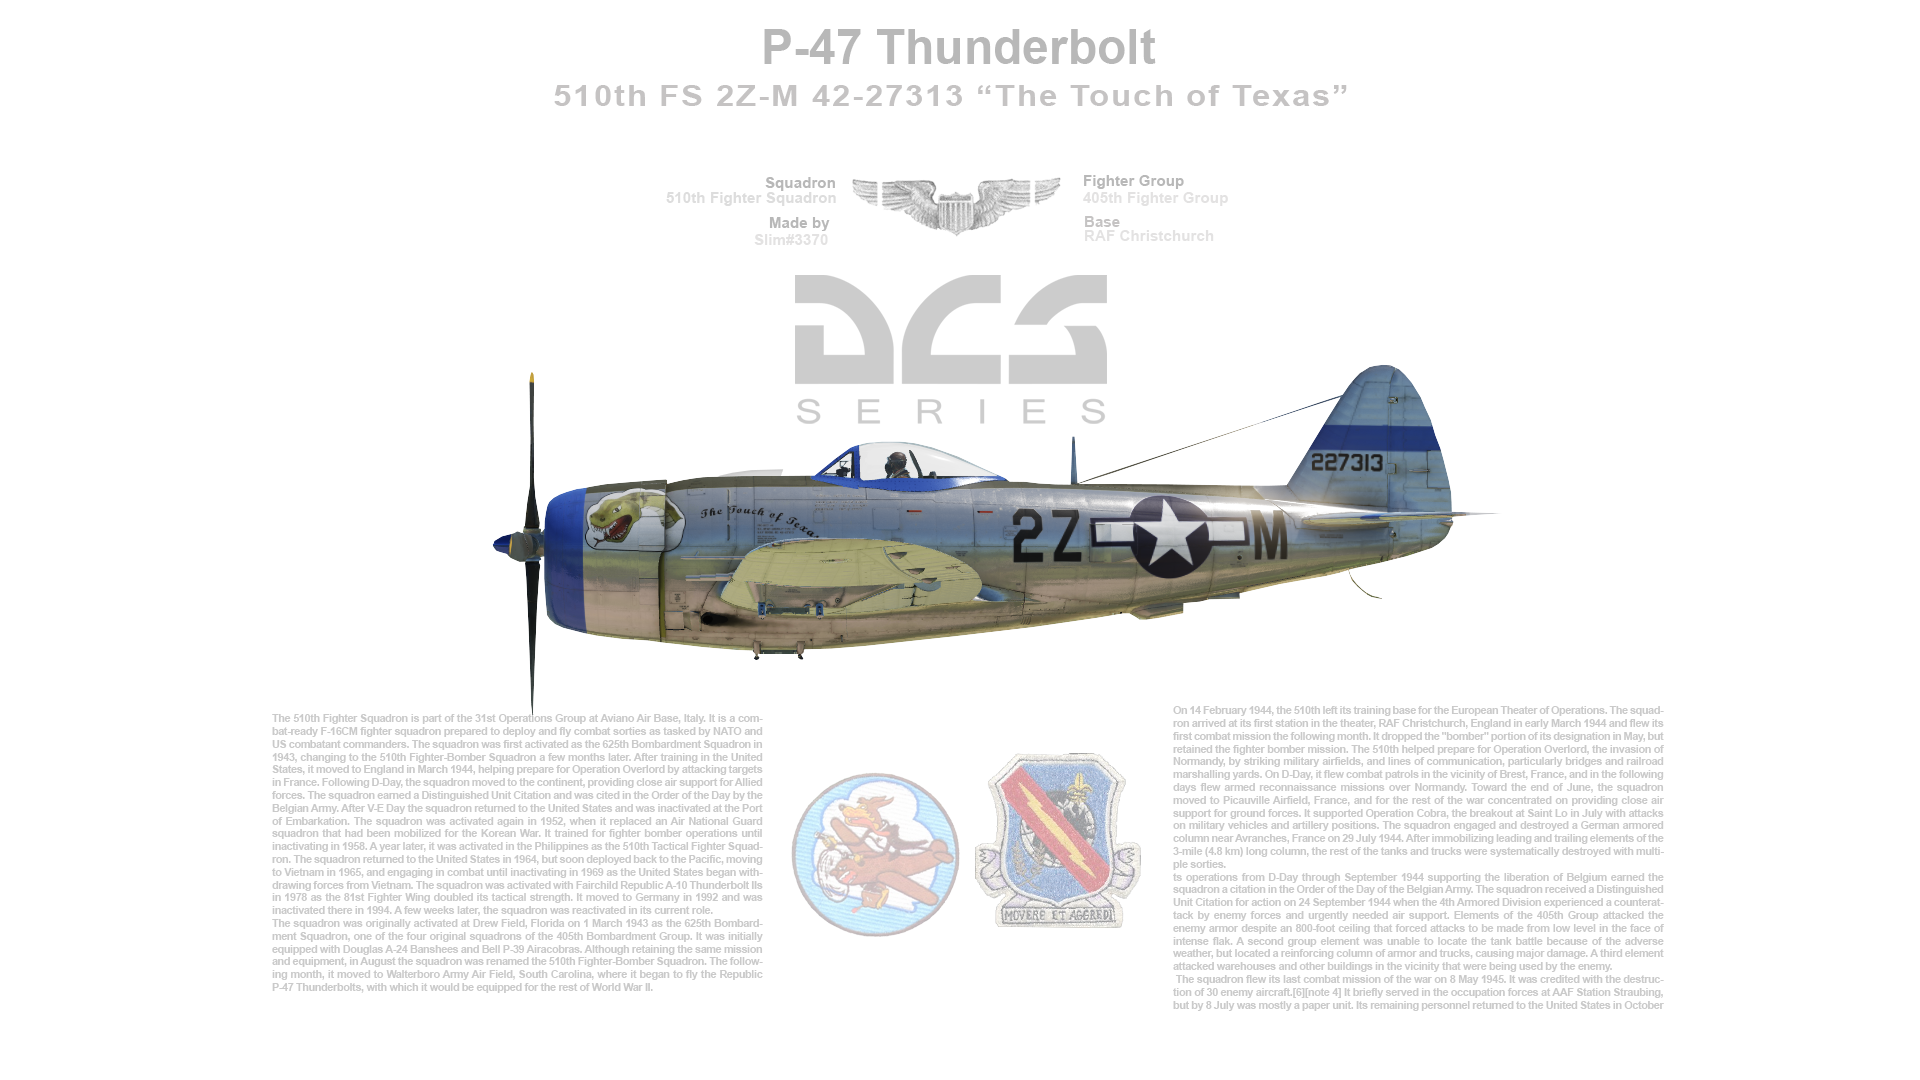 P-47D Thunderbolt 510th FS "The Touch of Texas"